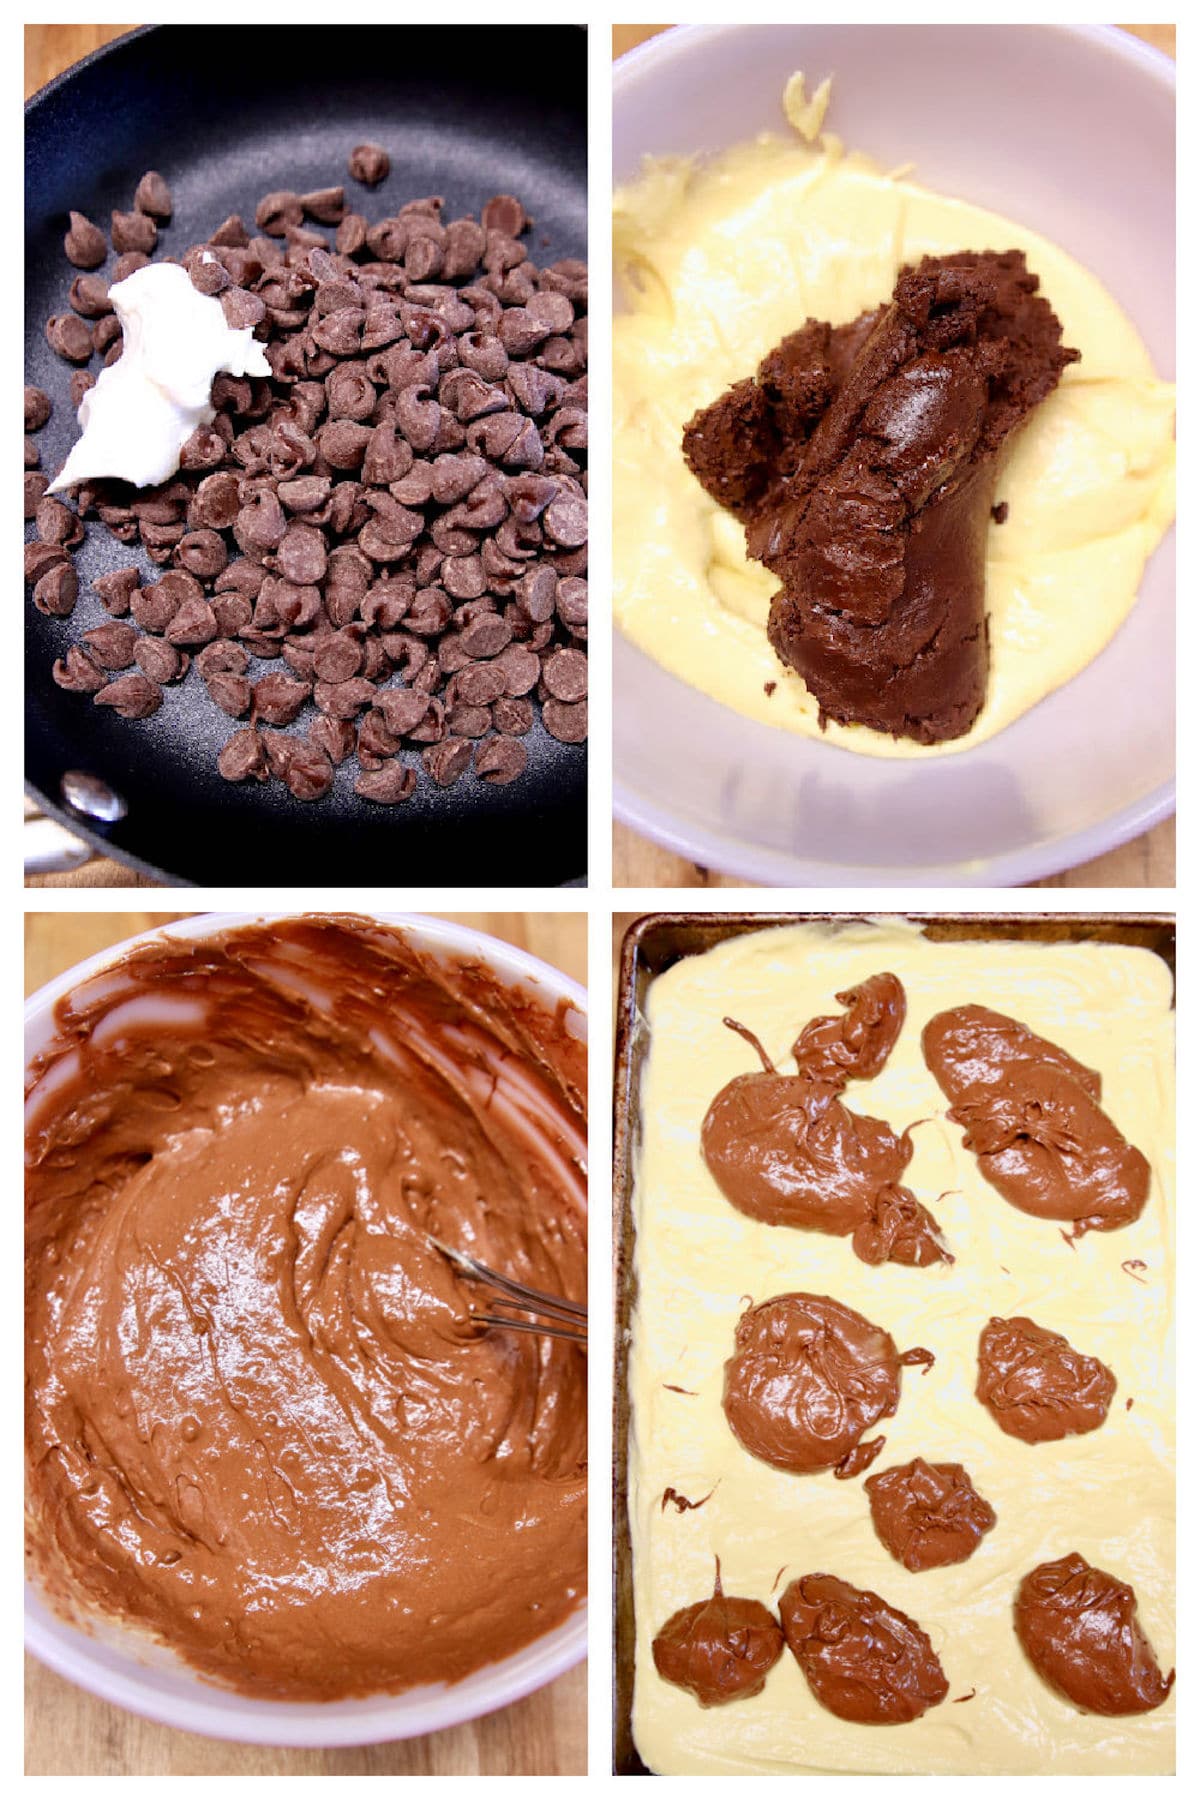 making chocolate marble for cake.